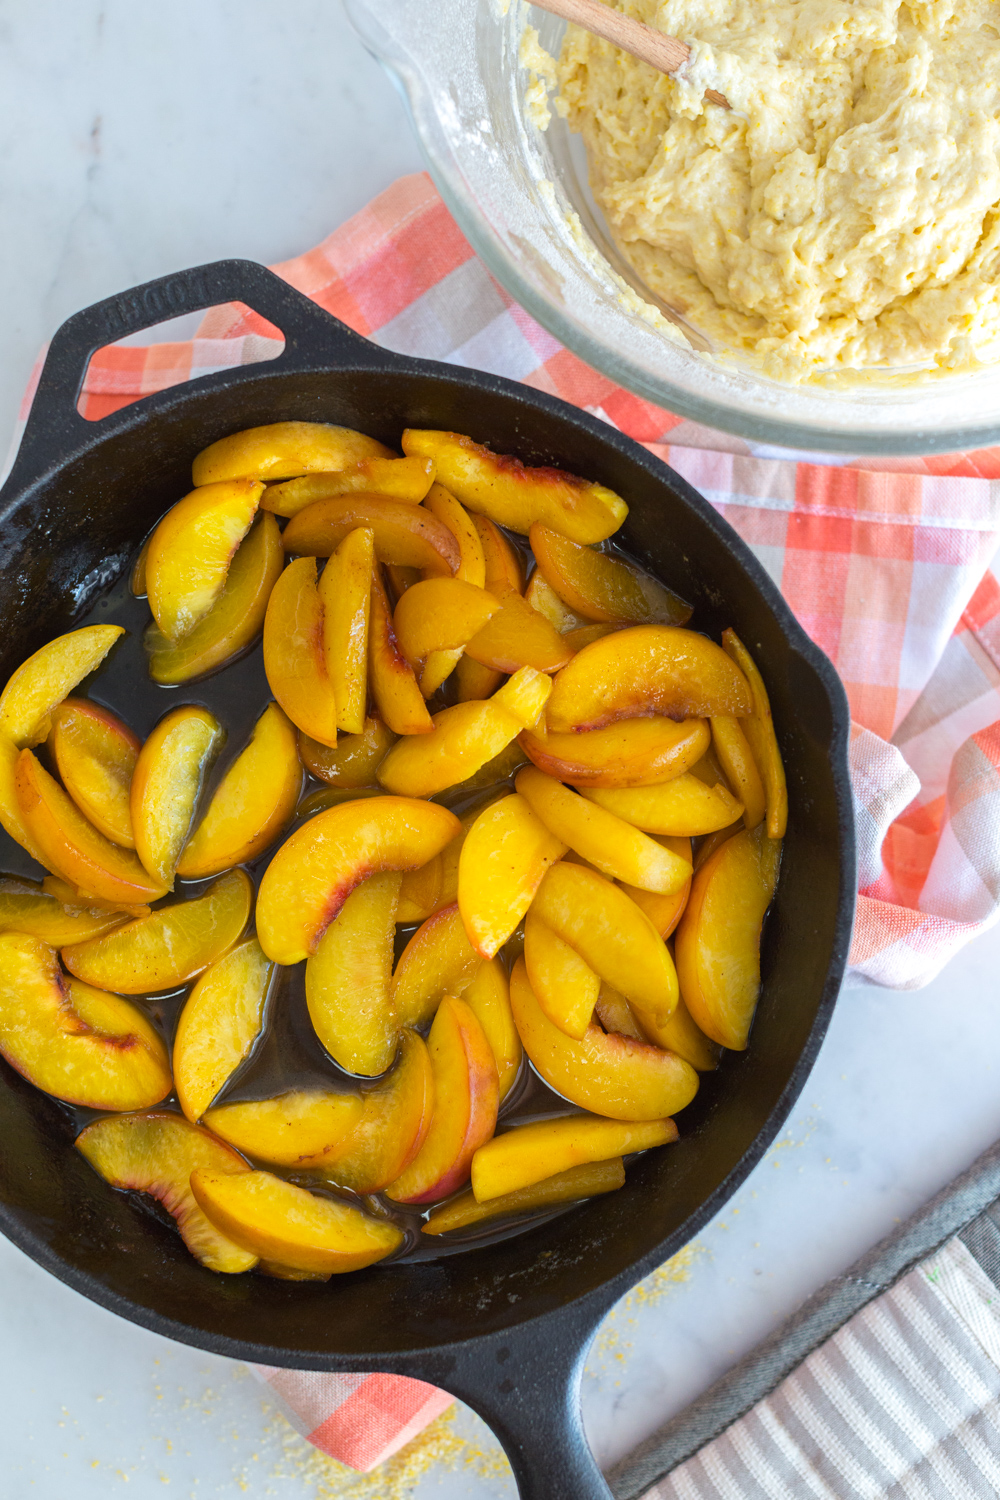 Mixing the Blueberry Peach Cornmeal Skillet Cake